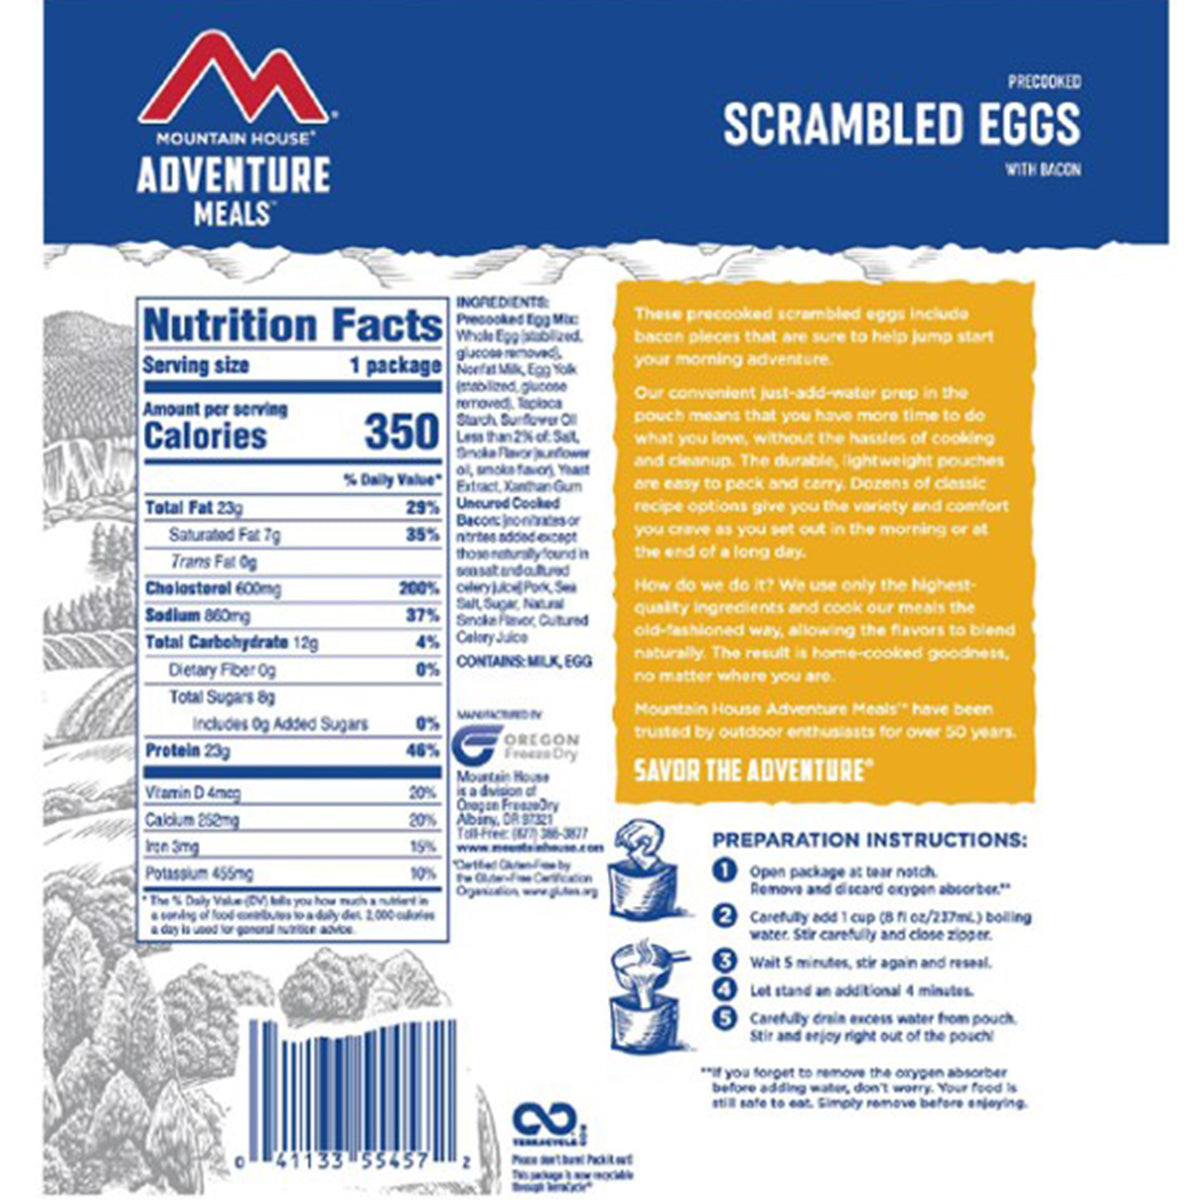 Mountain House Scrambled Eggs with Bacon in Mountain House Scrambled Eggs with Bacon by Mountain House | Camping - goHUNT Shop by GOHUNT | Mountain House - GOHUNT Shop